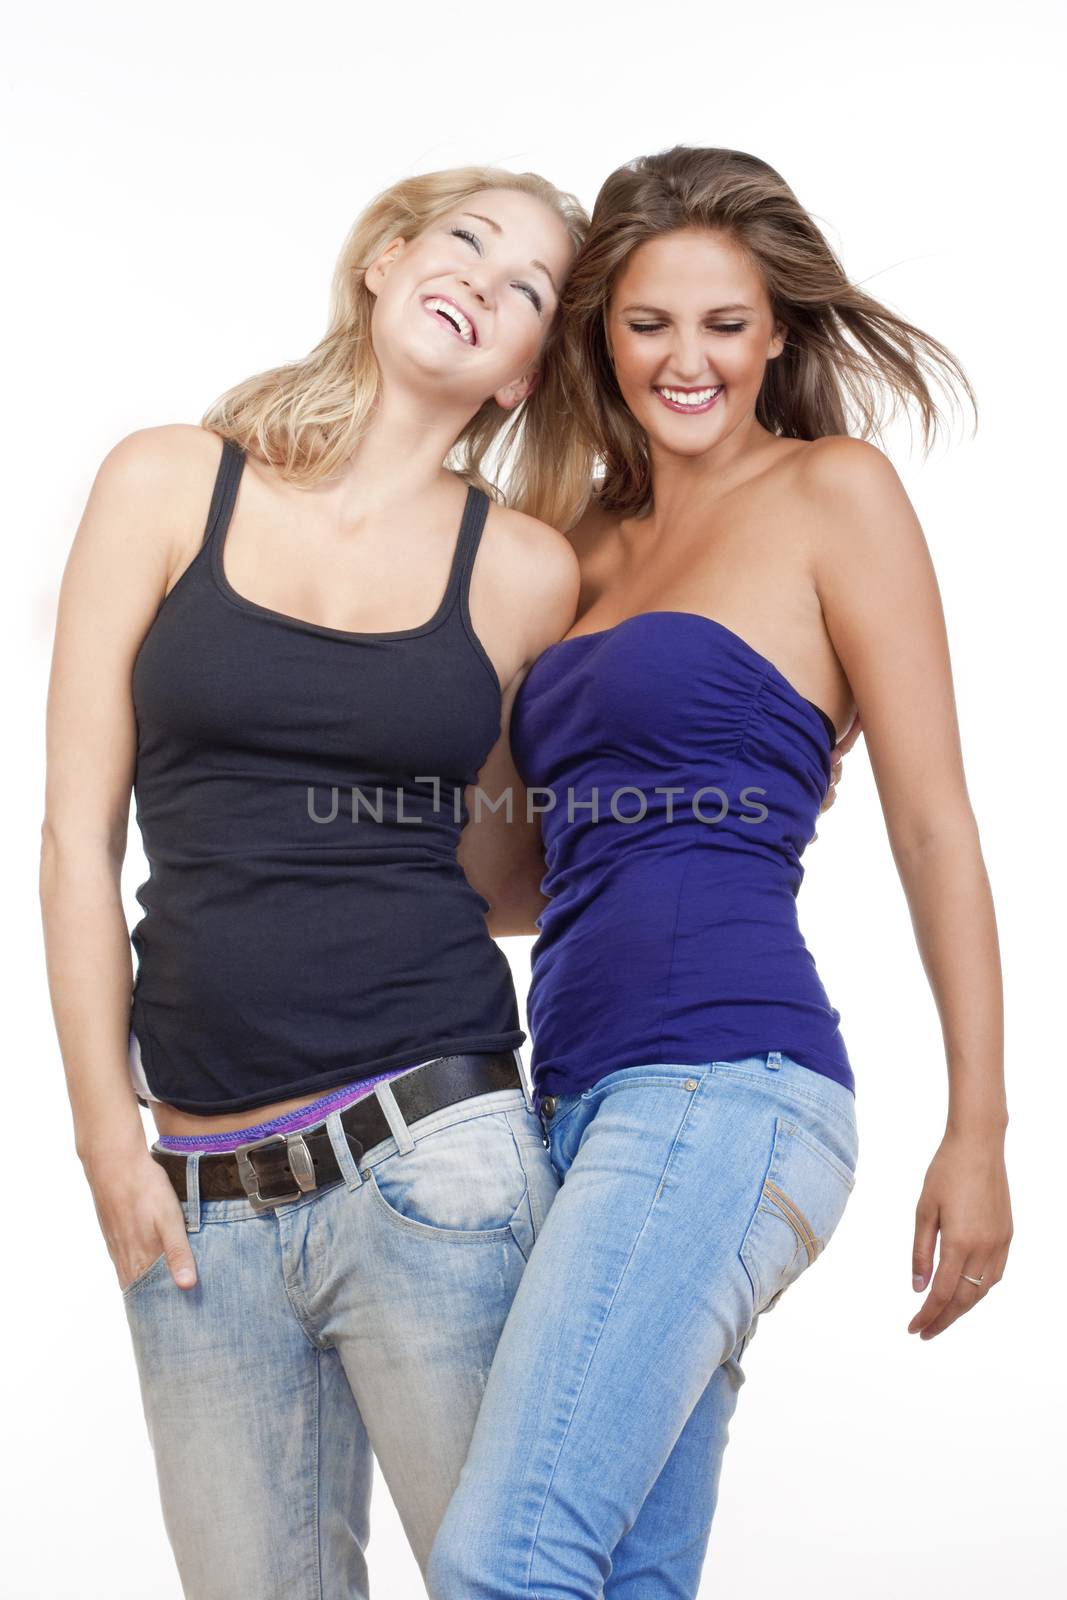 two young happy female friends standing smiling - isolated on white